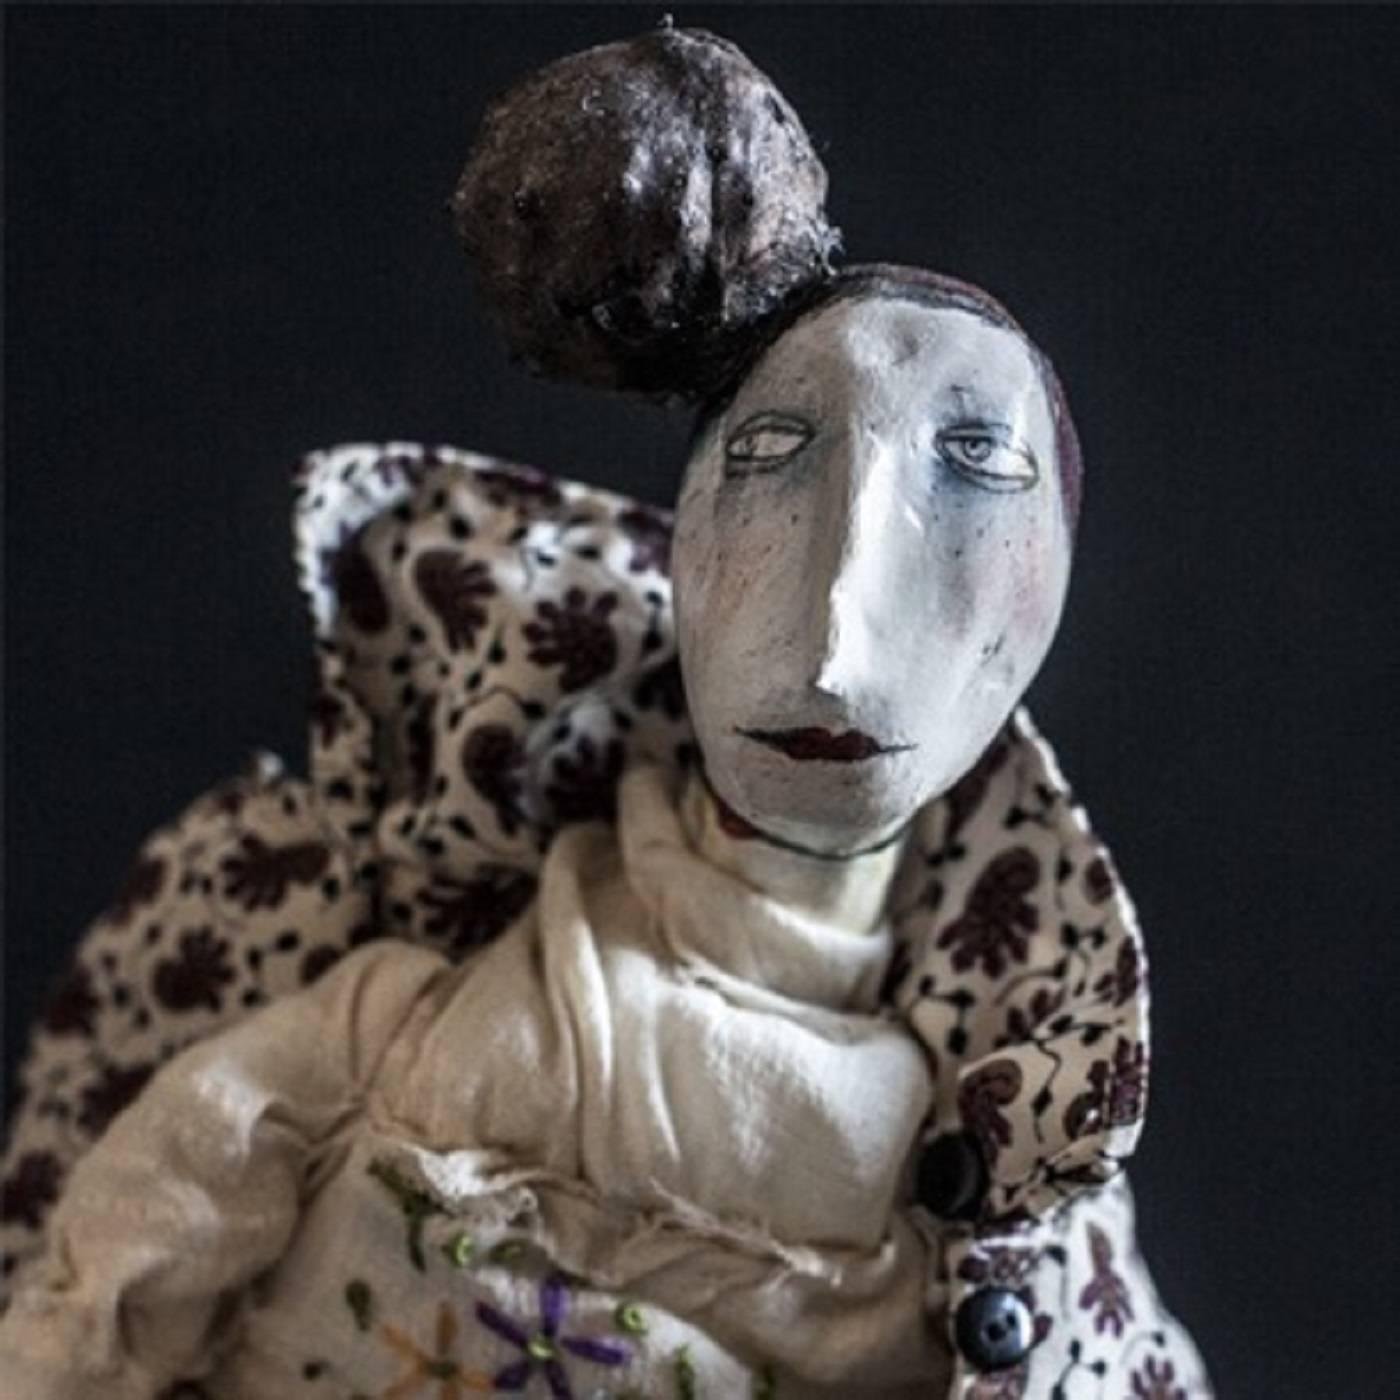 This is a mixed media art doll, used materials are clay, vintage fabrics, silk, wool, acrylic paint, love.
This sculpture can stand somewhere safely, away from direct lighting and any source of heat or water, this is not a toy, it's a special